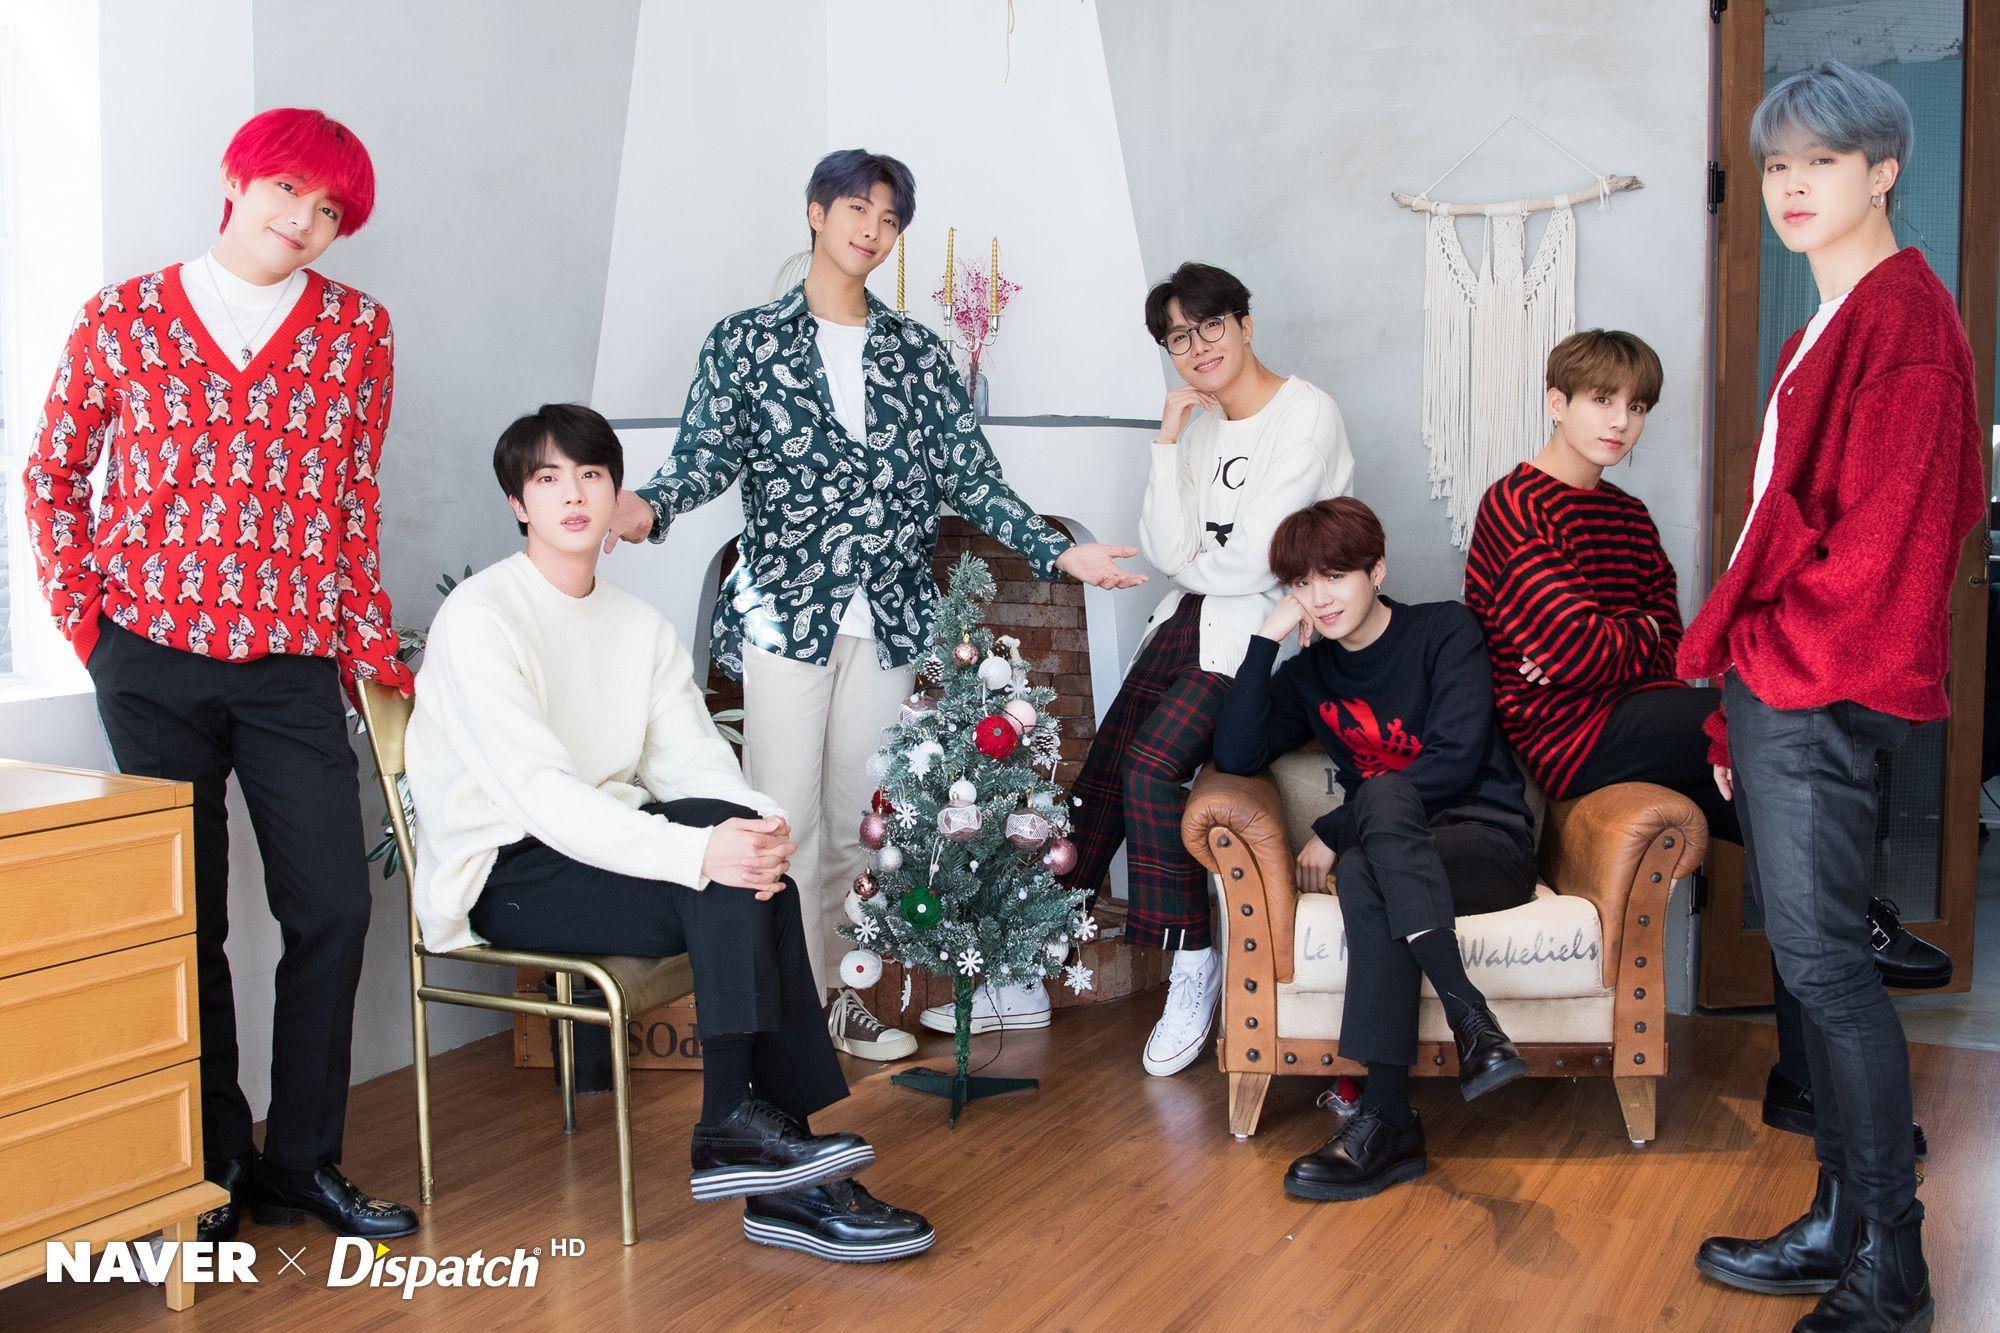 Bts Christmas Wallpaper Laptop - HD Images Collection